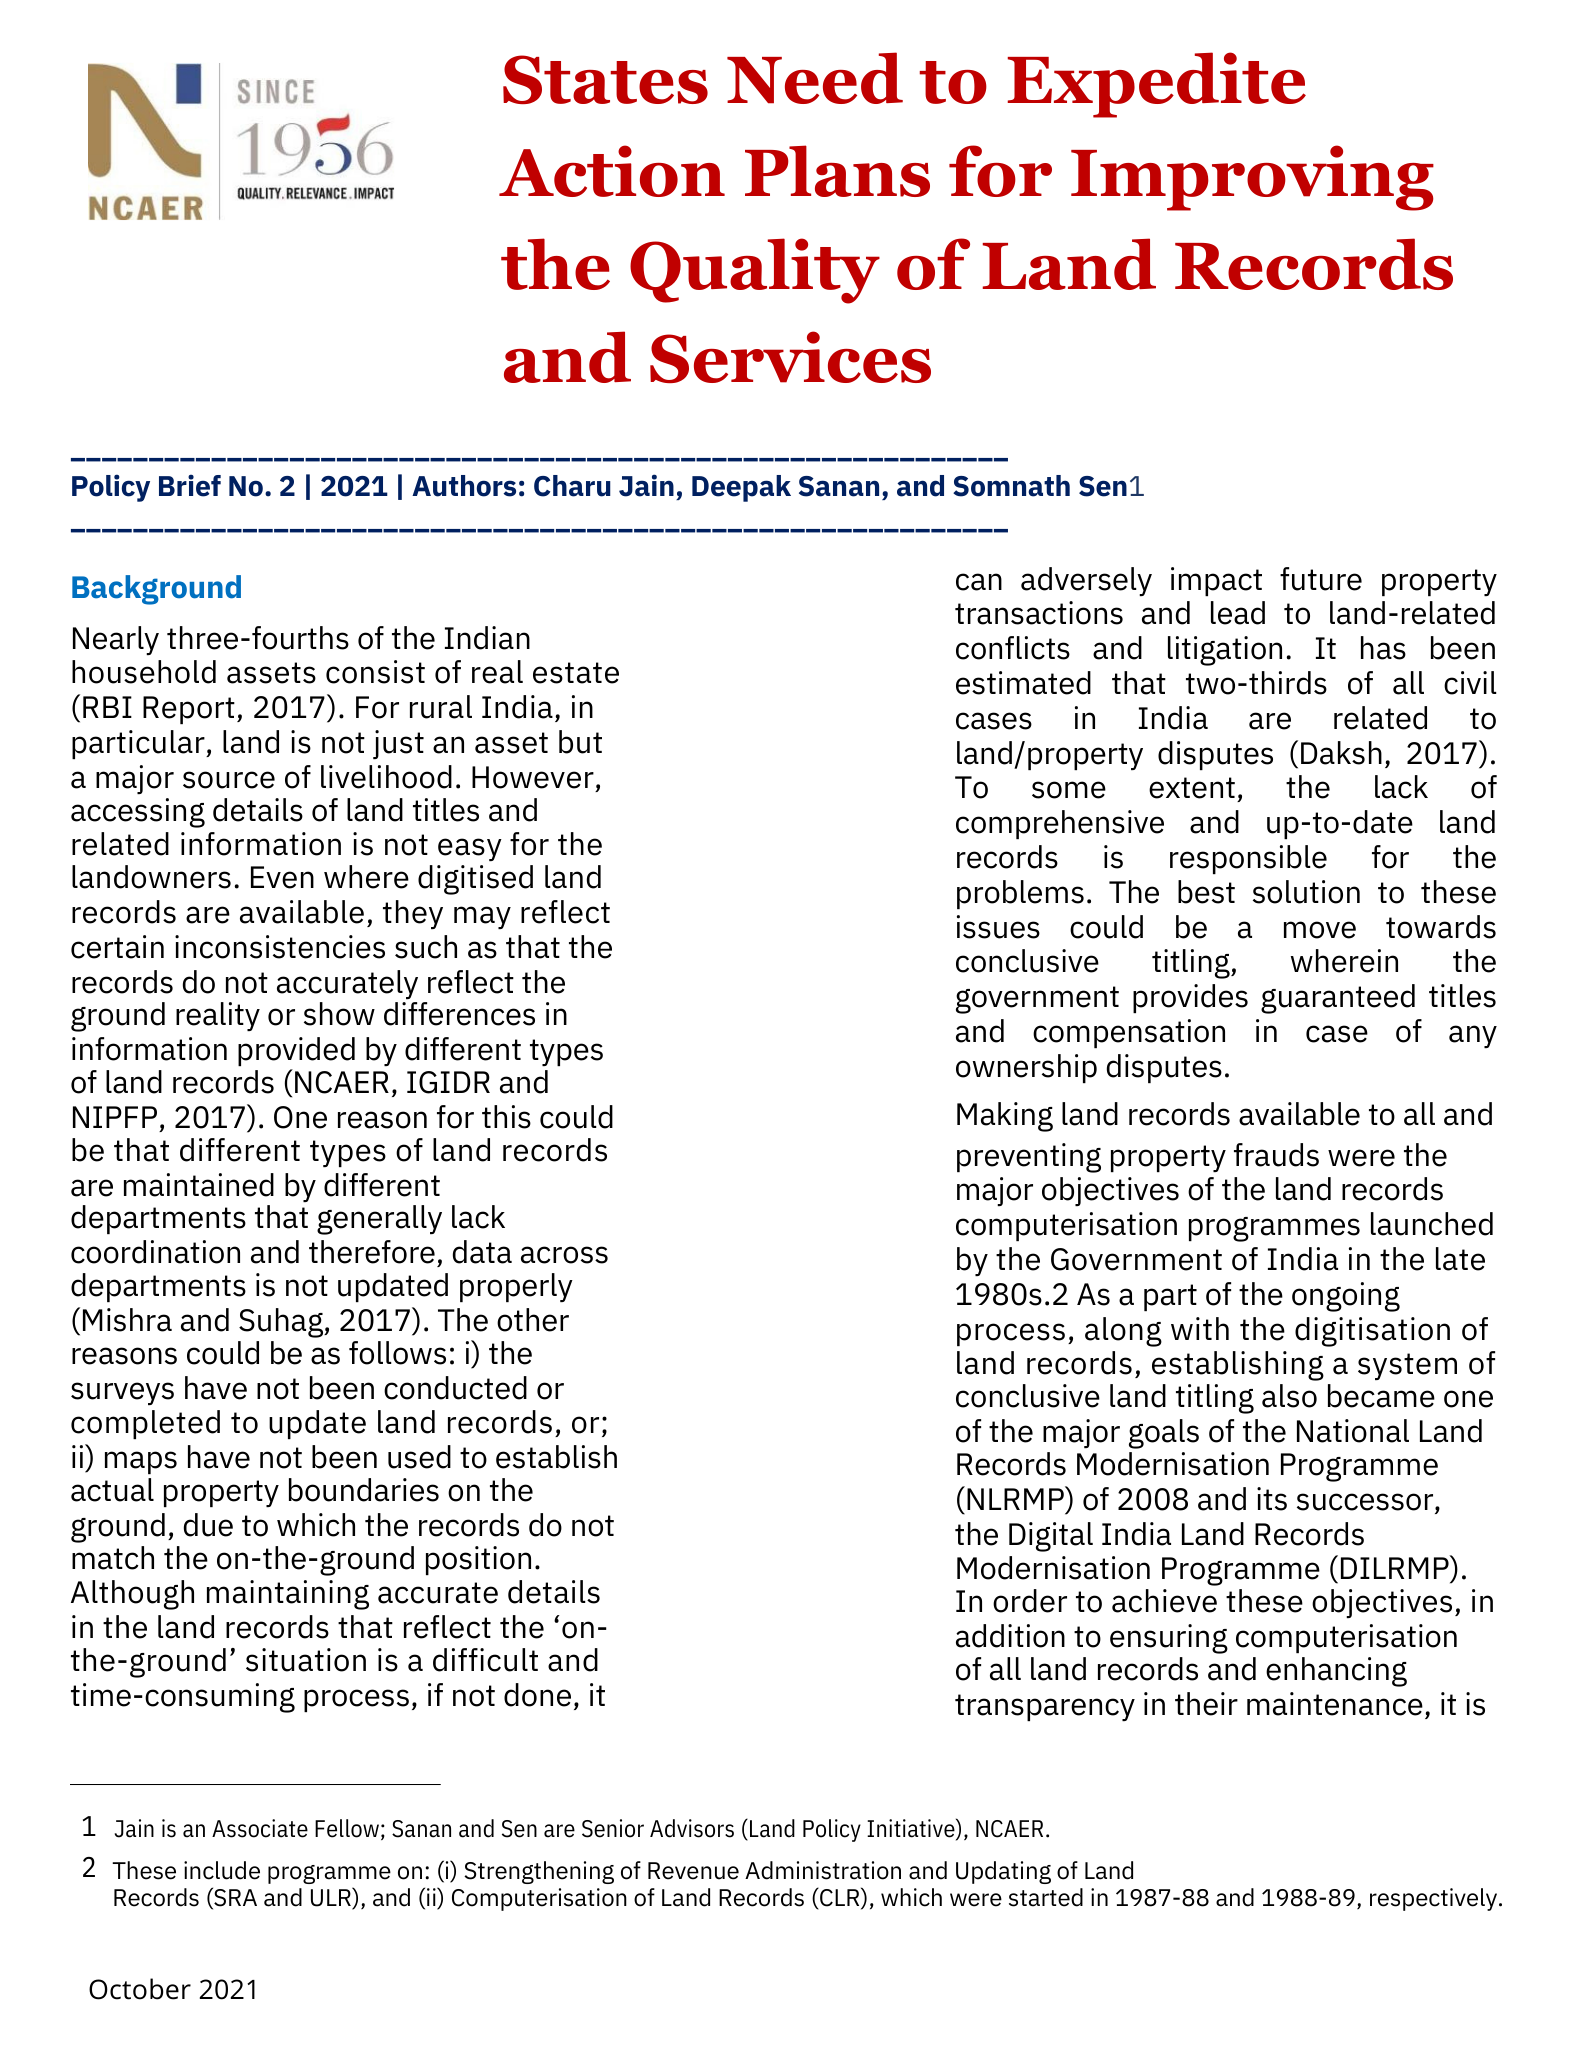 States Need to Expedite Action Plans for Improving the Quality of Land Records and Services